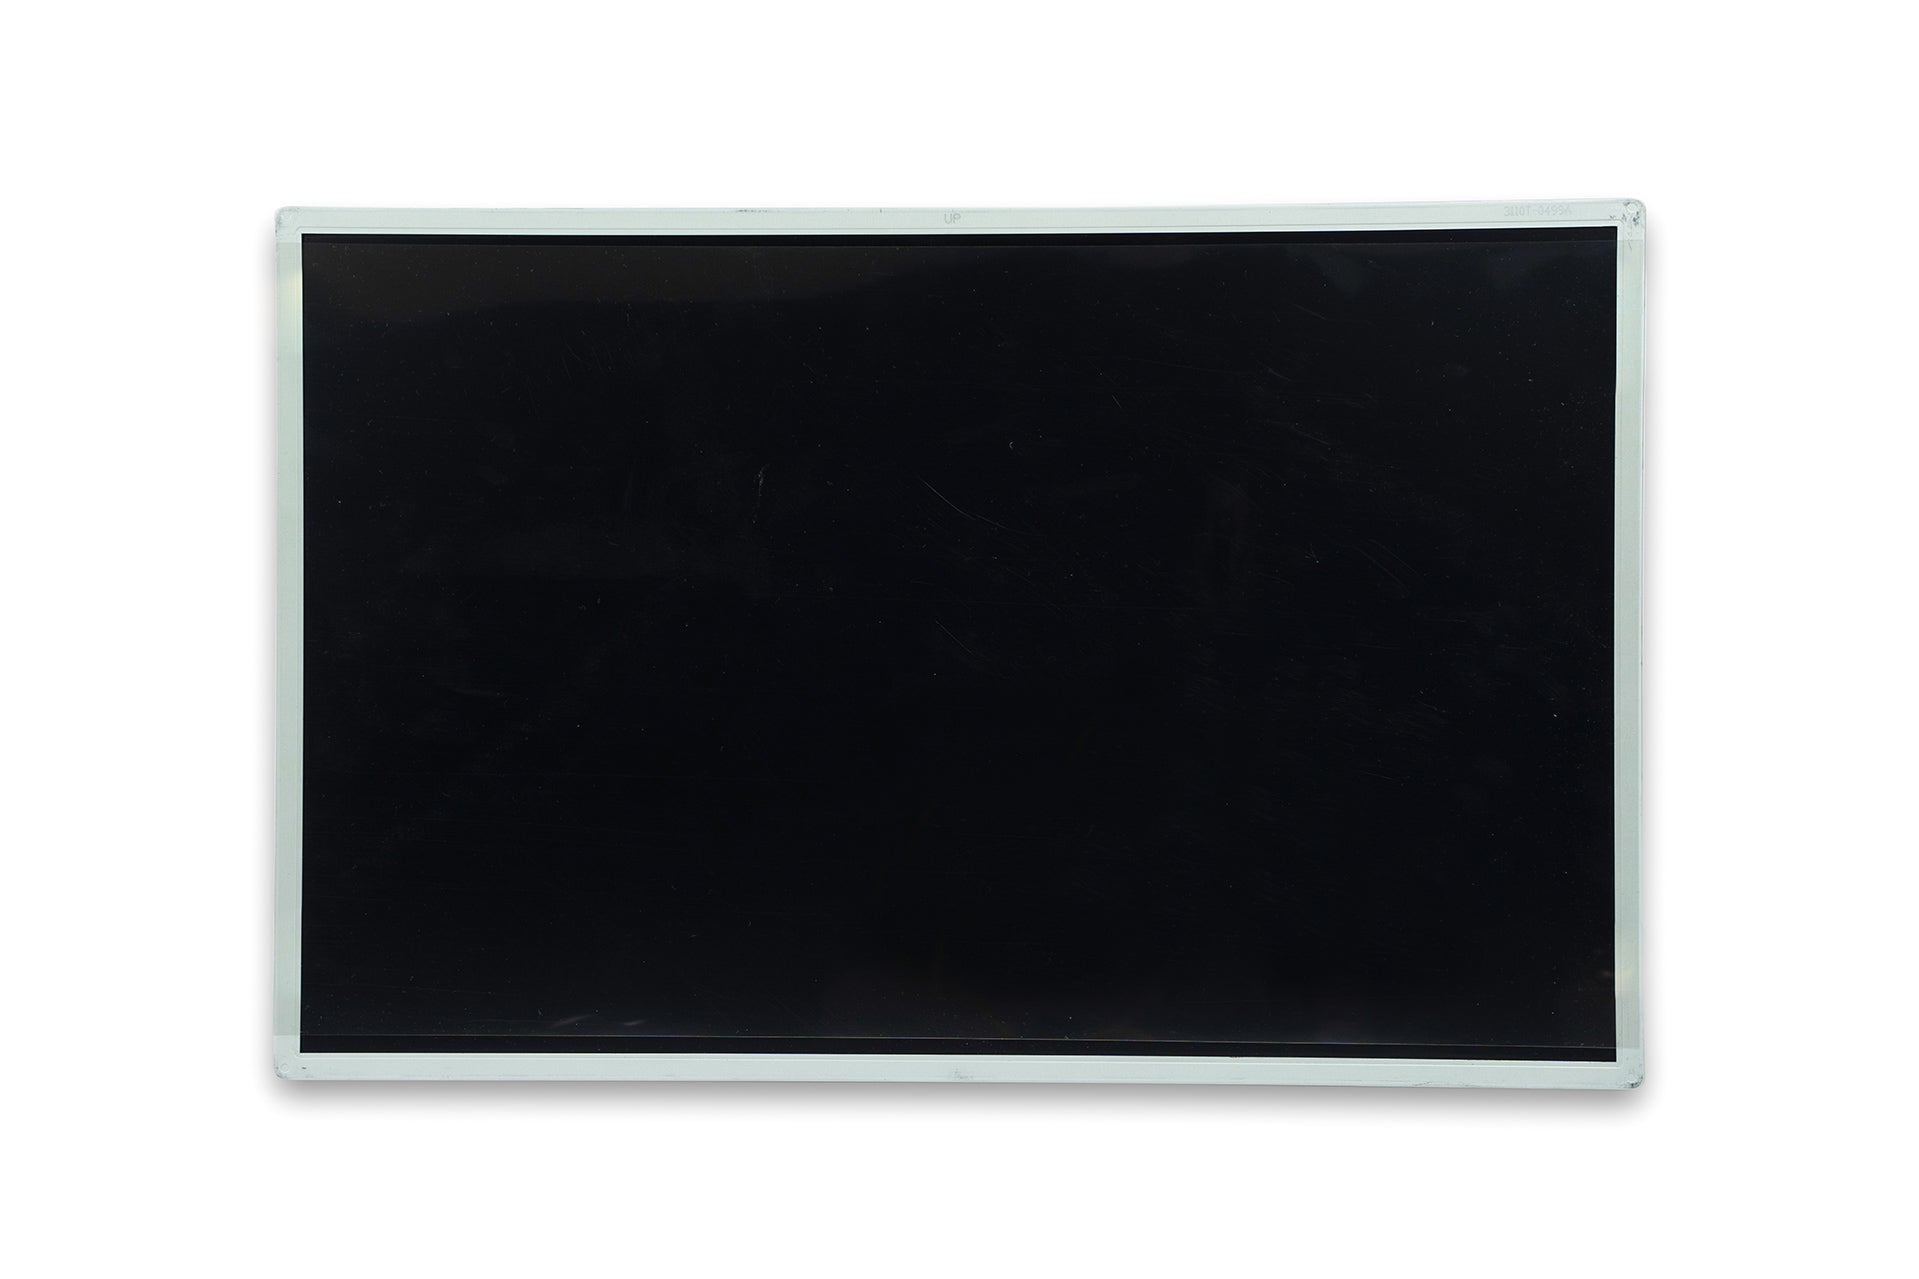 LCD Panel to suit SHFL 22" EQX - LM220WE4(SL)(B2)